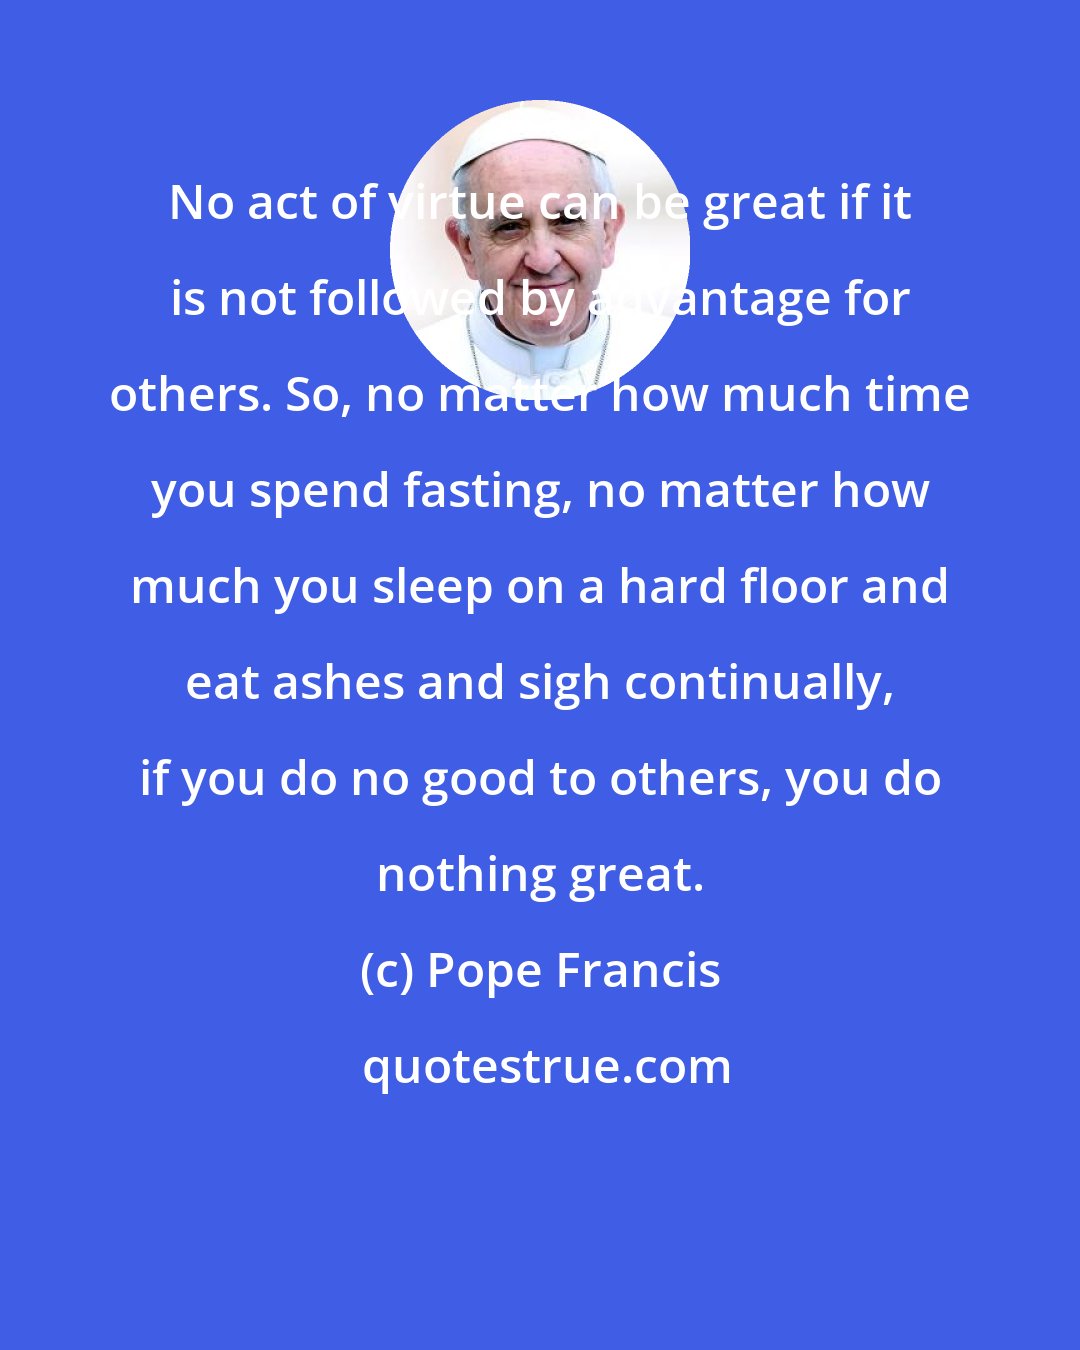 Pope Francis: No act of virtue can be great if it is not followed by advantage for others. So, no matter how much time you spend fasting, no matter how much you sleep on a hard floor and eat ashes and sigh continually, if you do no good to others, you do nothing great.